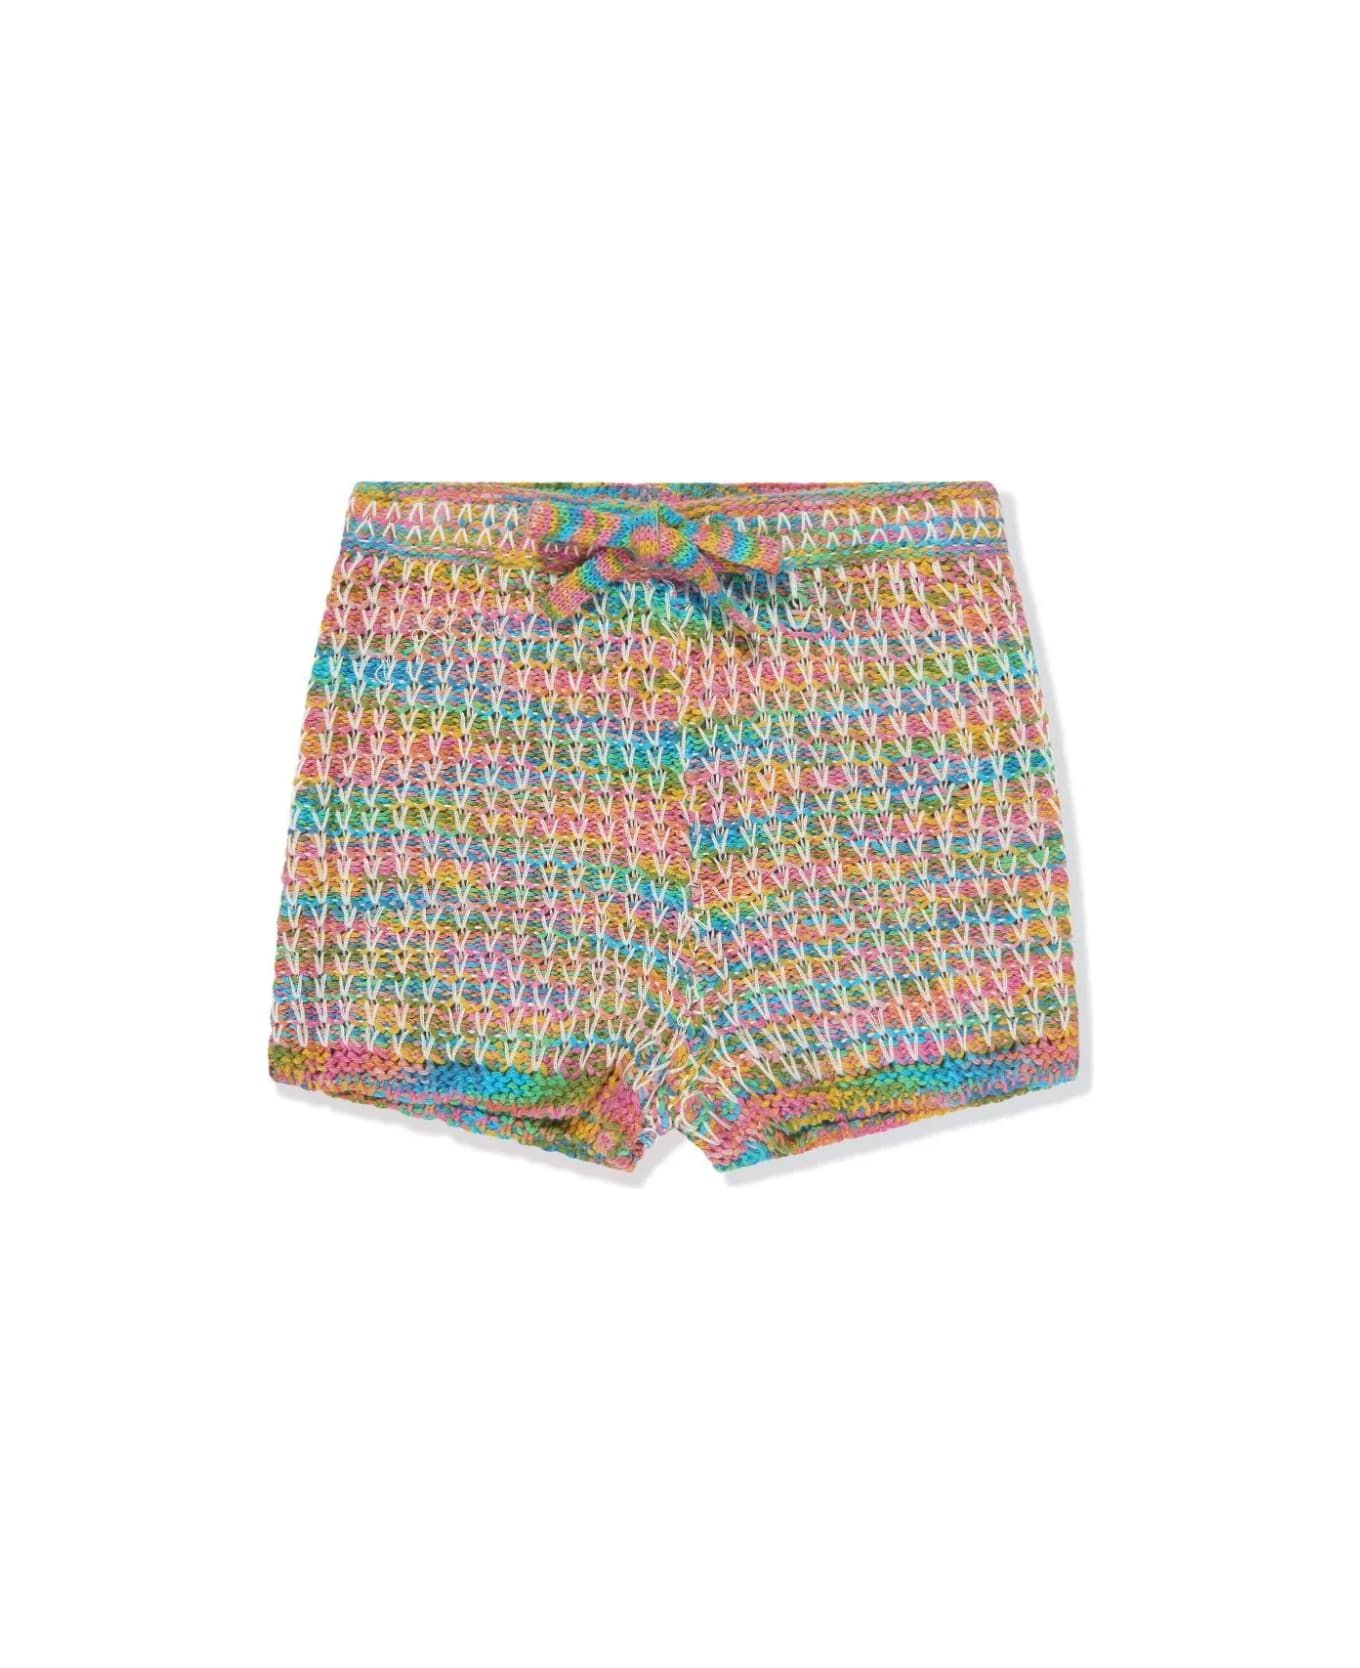 Zimmermann Shorts All'uncinetto August - Multicolor